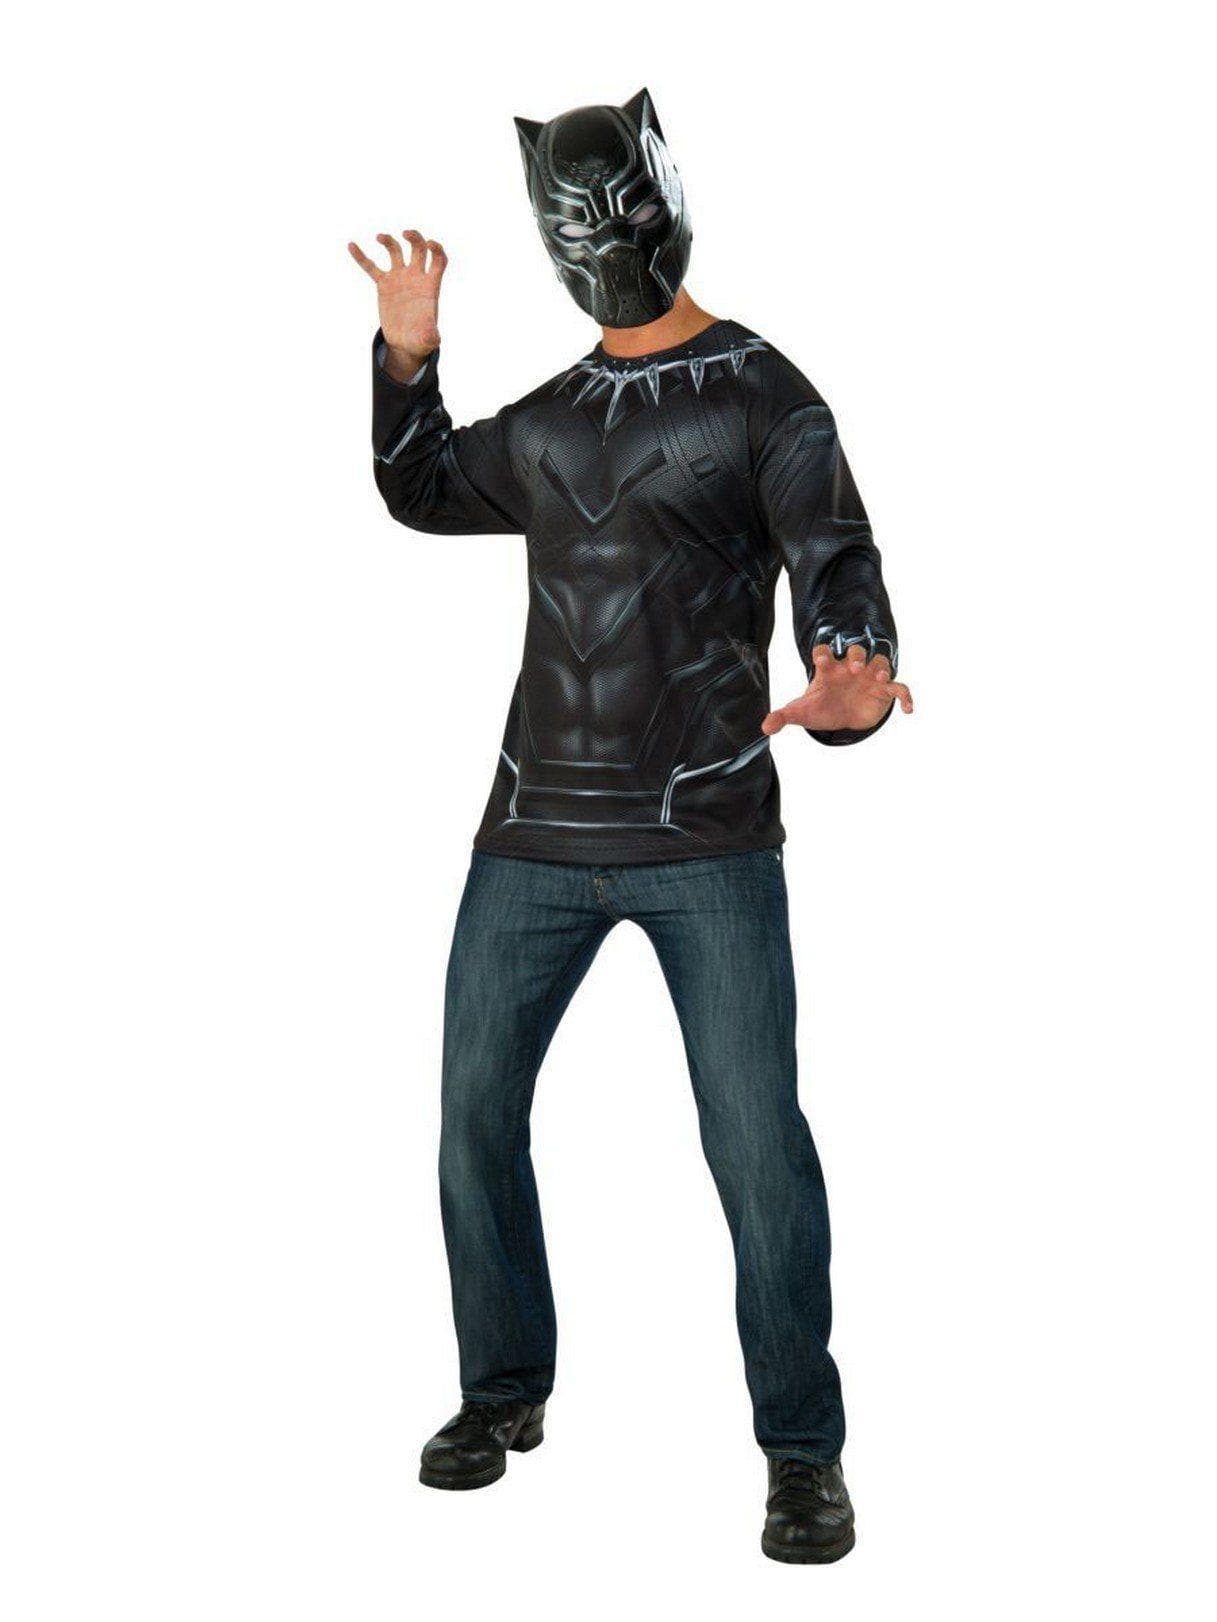 Adult Black Panther Black Panther Costume - costumes.com